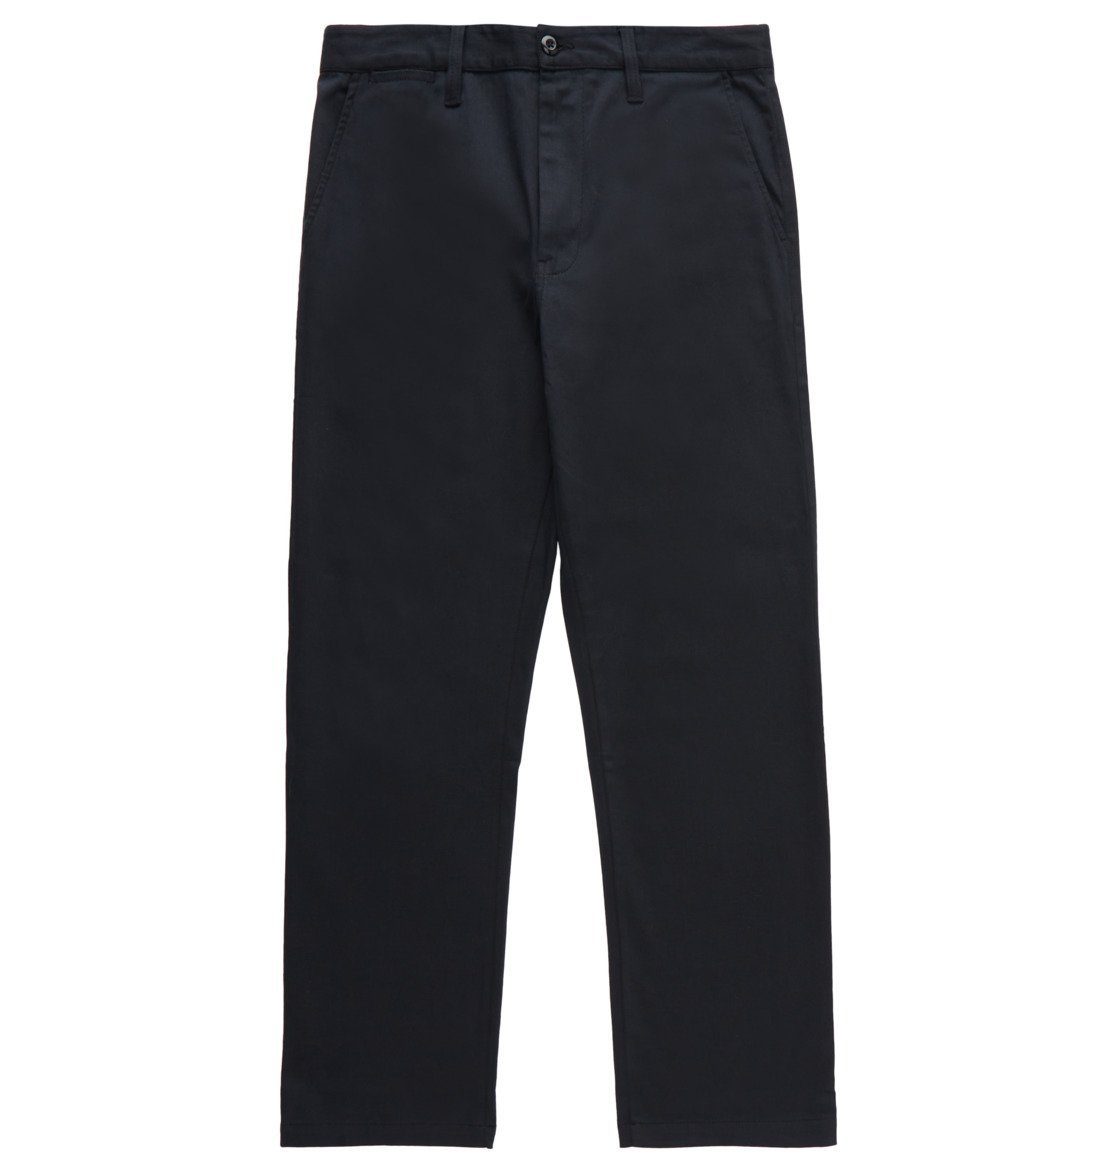 DC Shoes Chinos Relaxed Black Worker